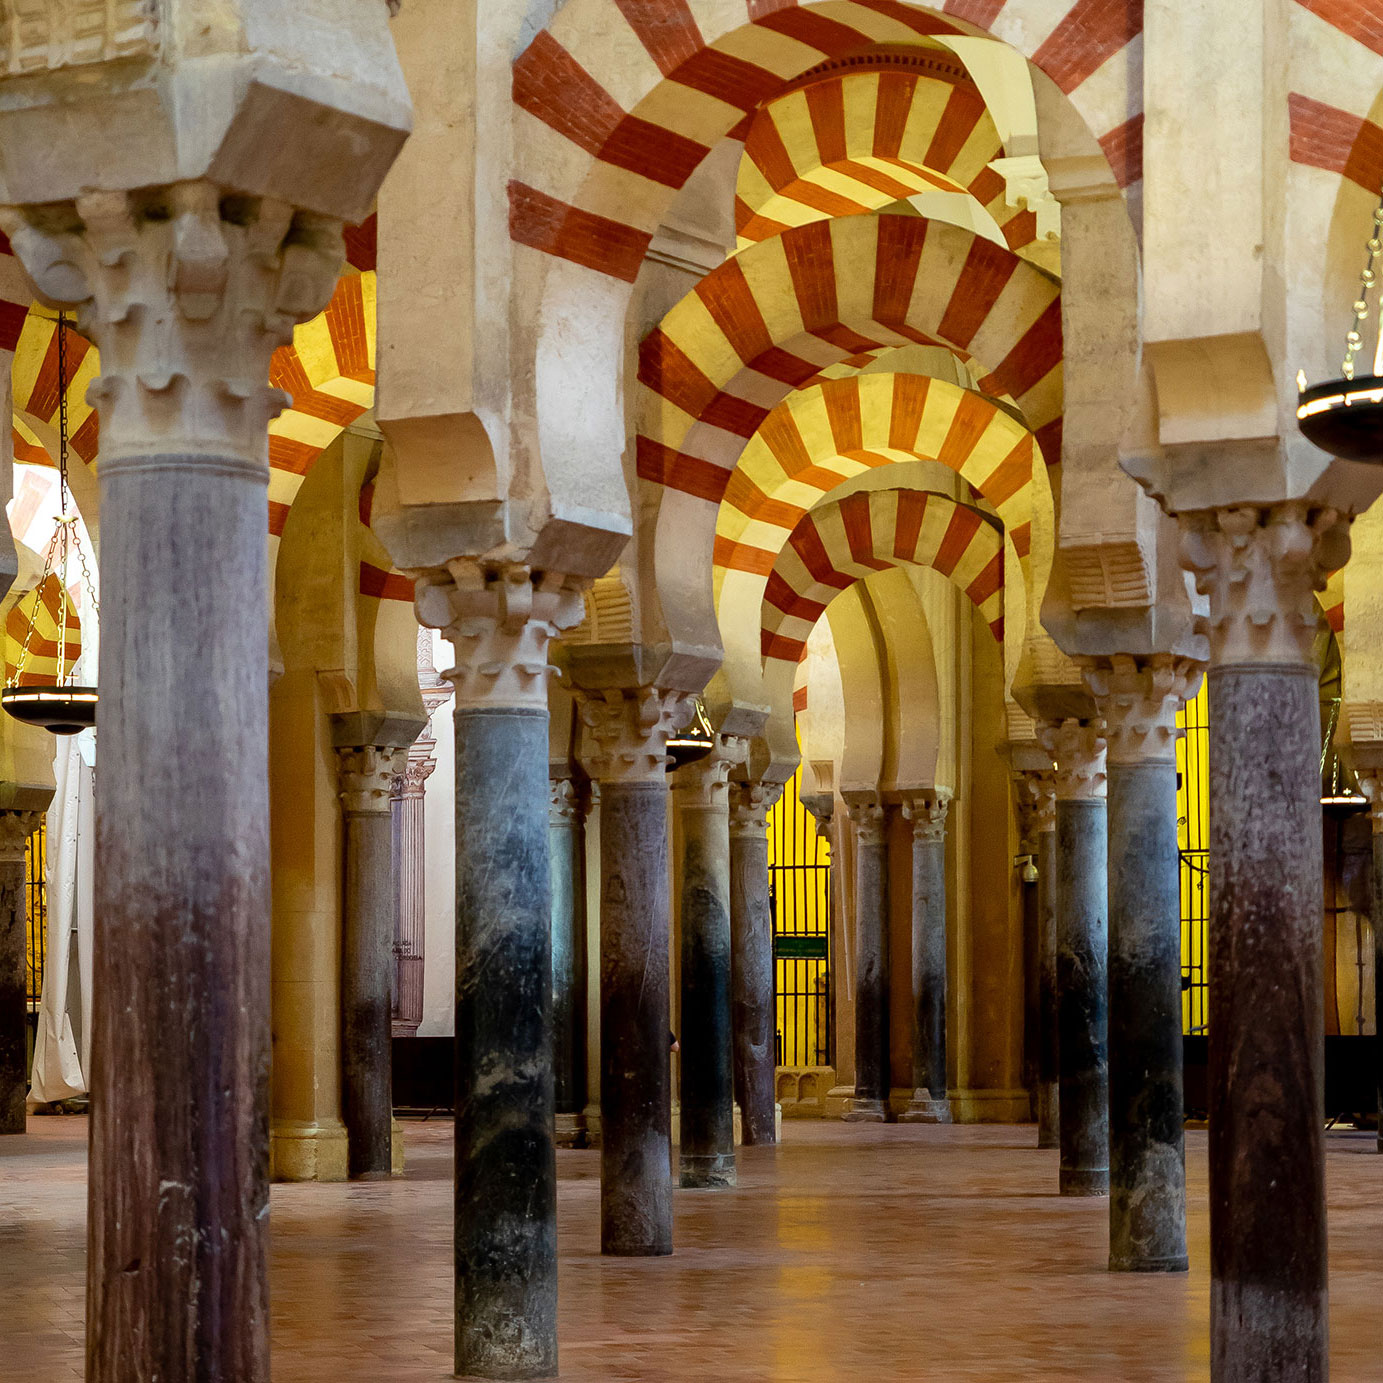 Moorish Architecture and the Cultural Bridge between Morocco and Spain